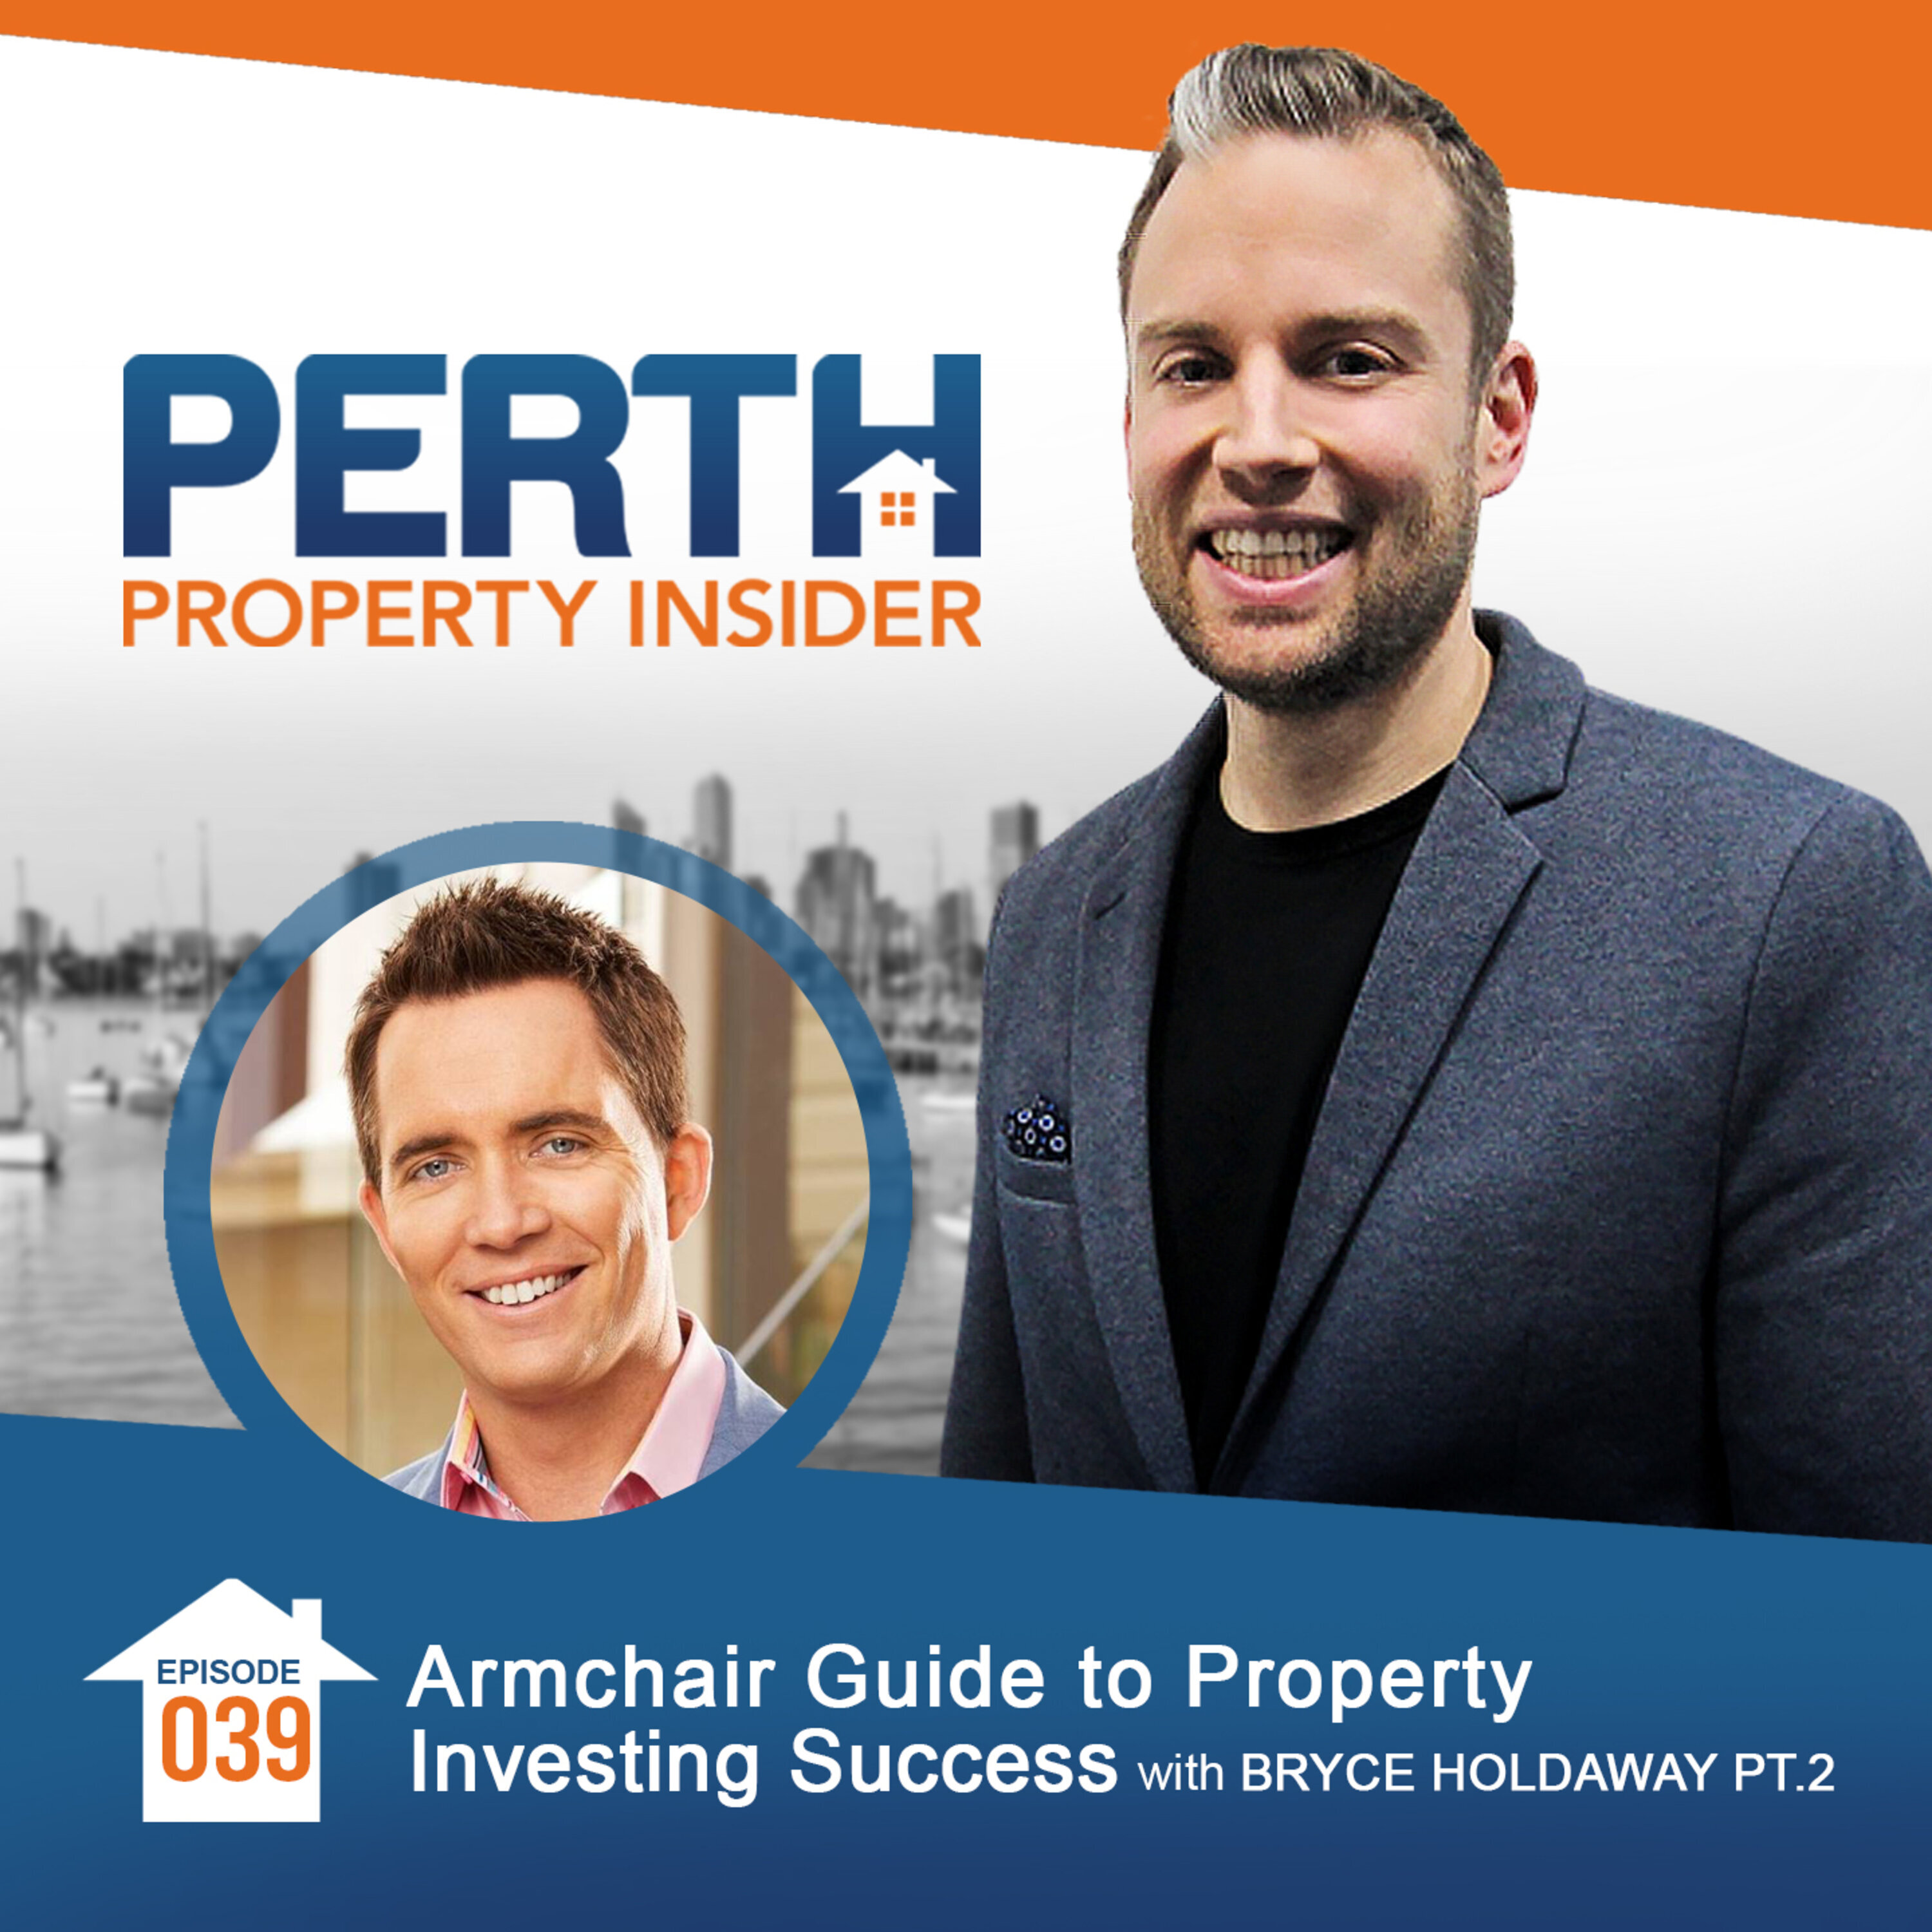 Armchair Guide to Property Investing Success with Bryce Holdaway Pt 2